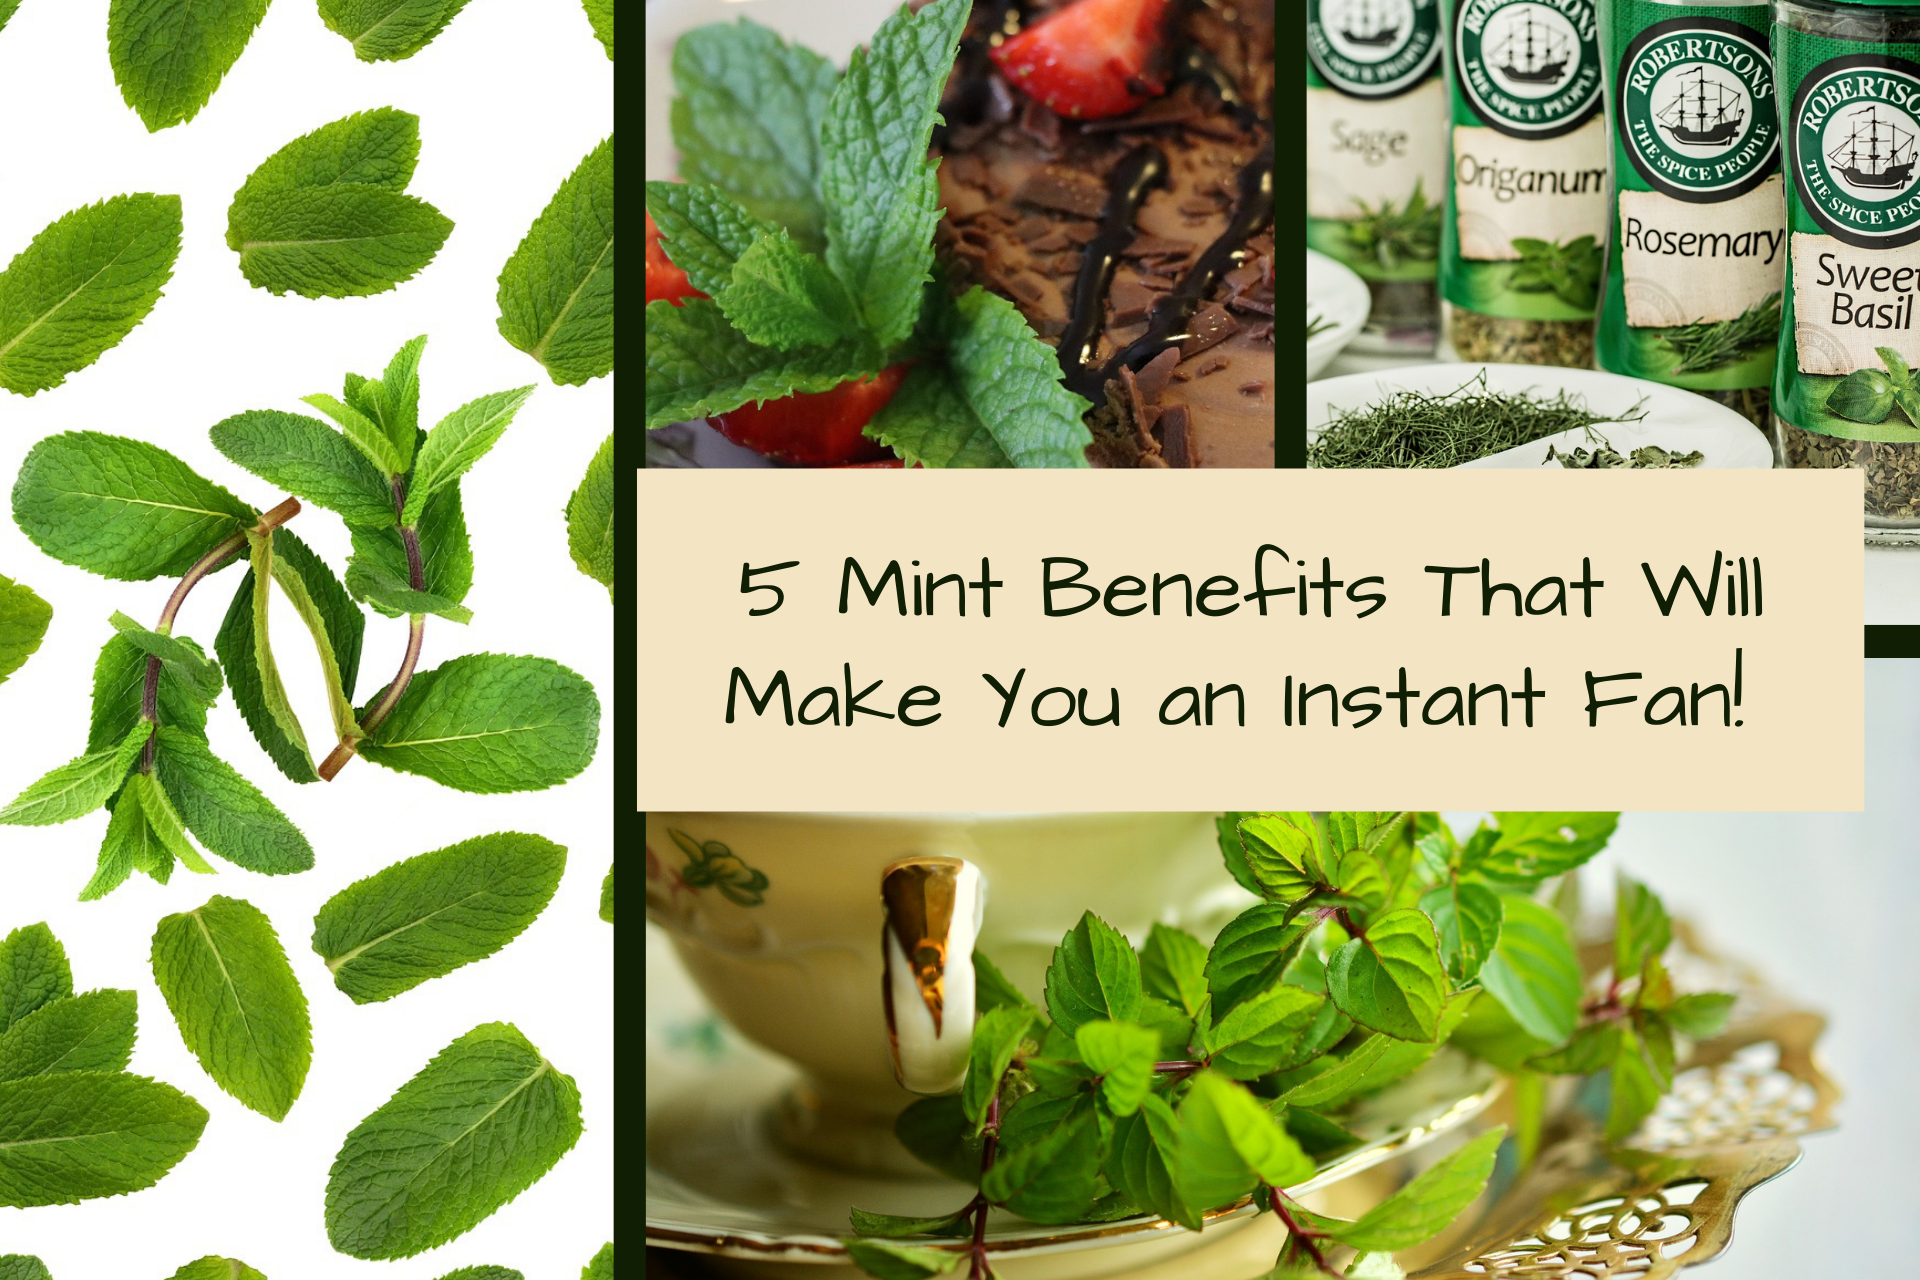 Mint Leaves: Various health benefits